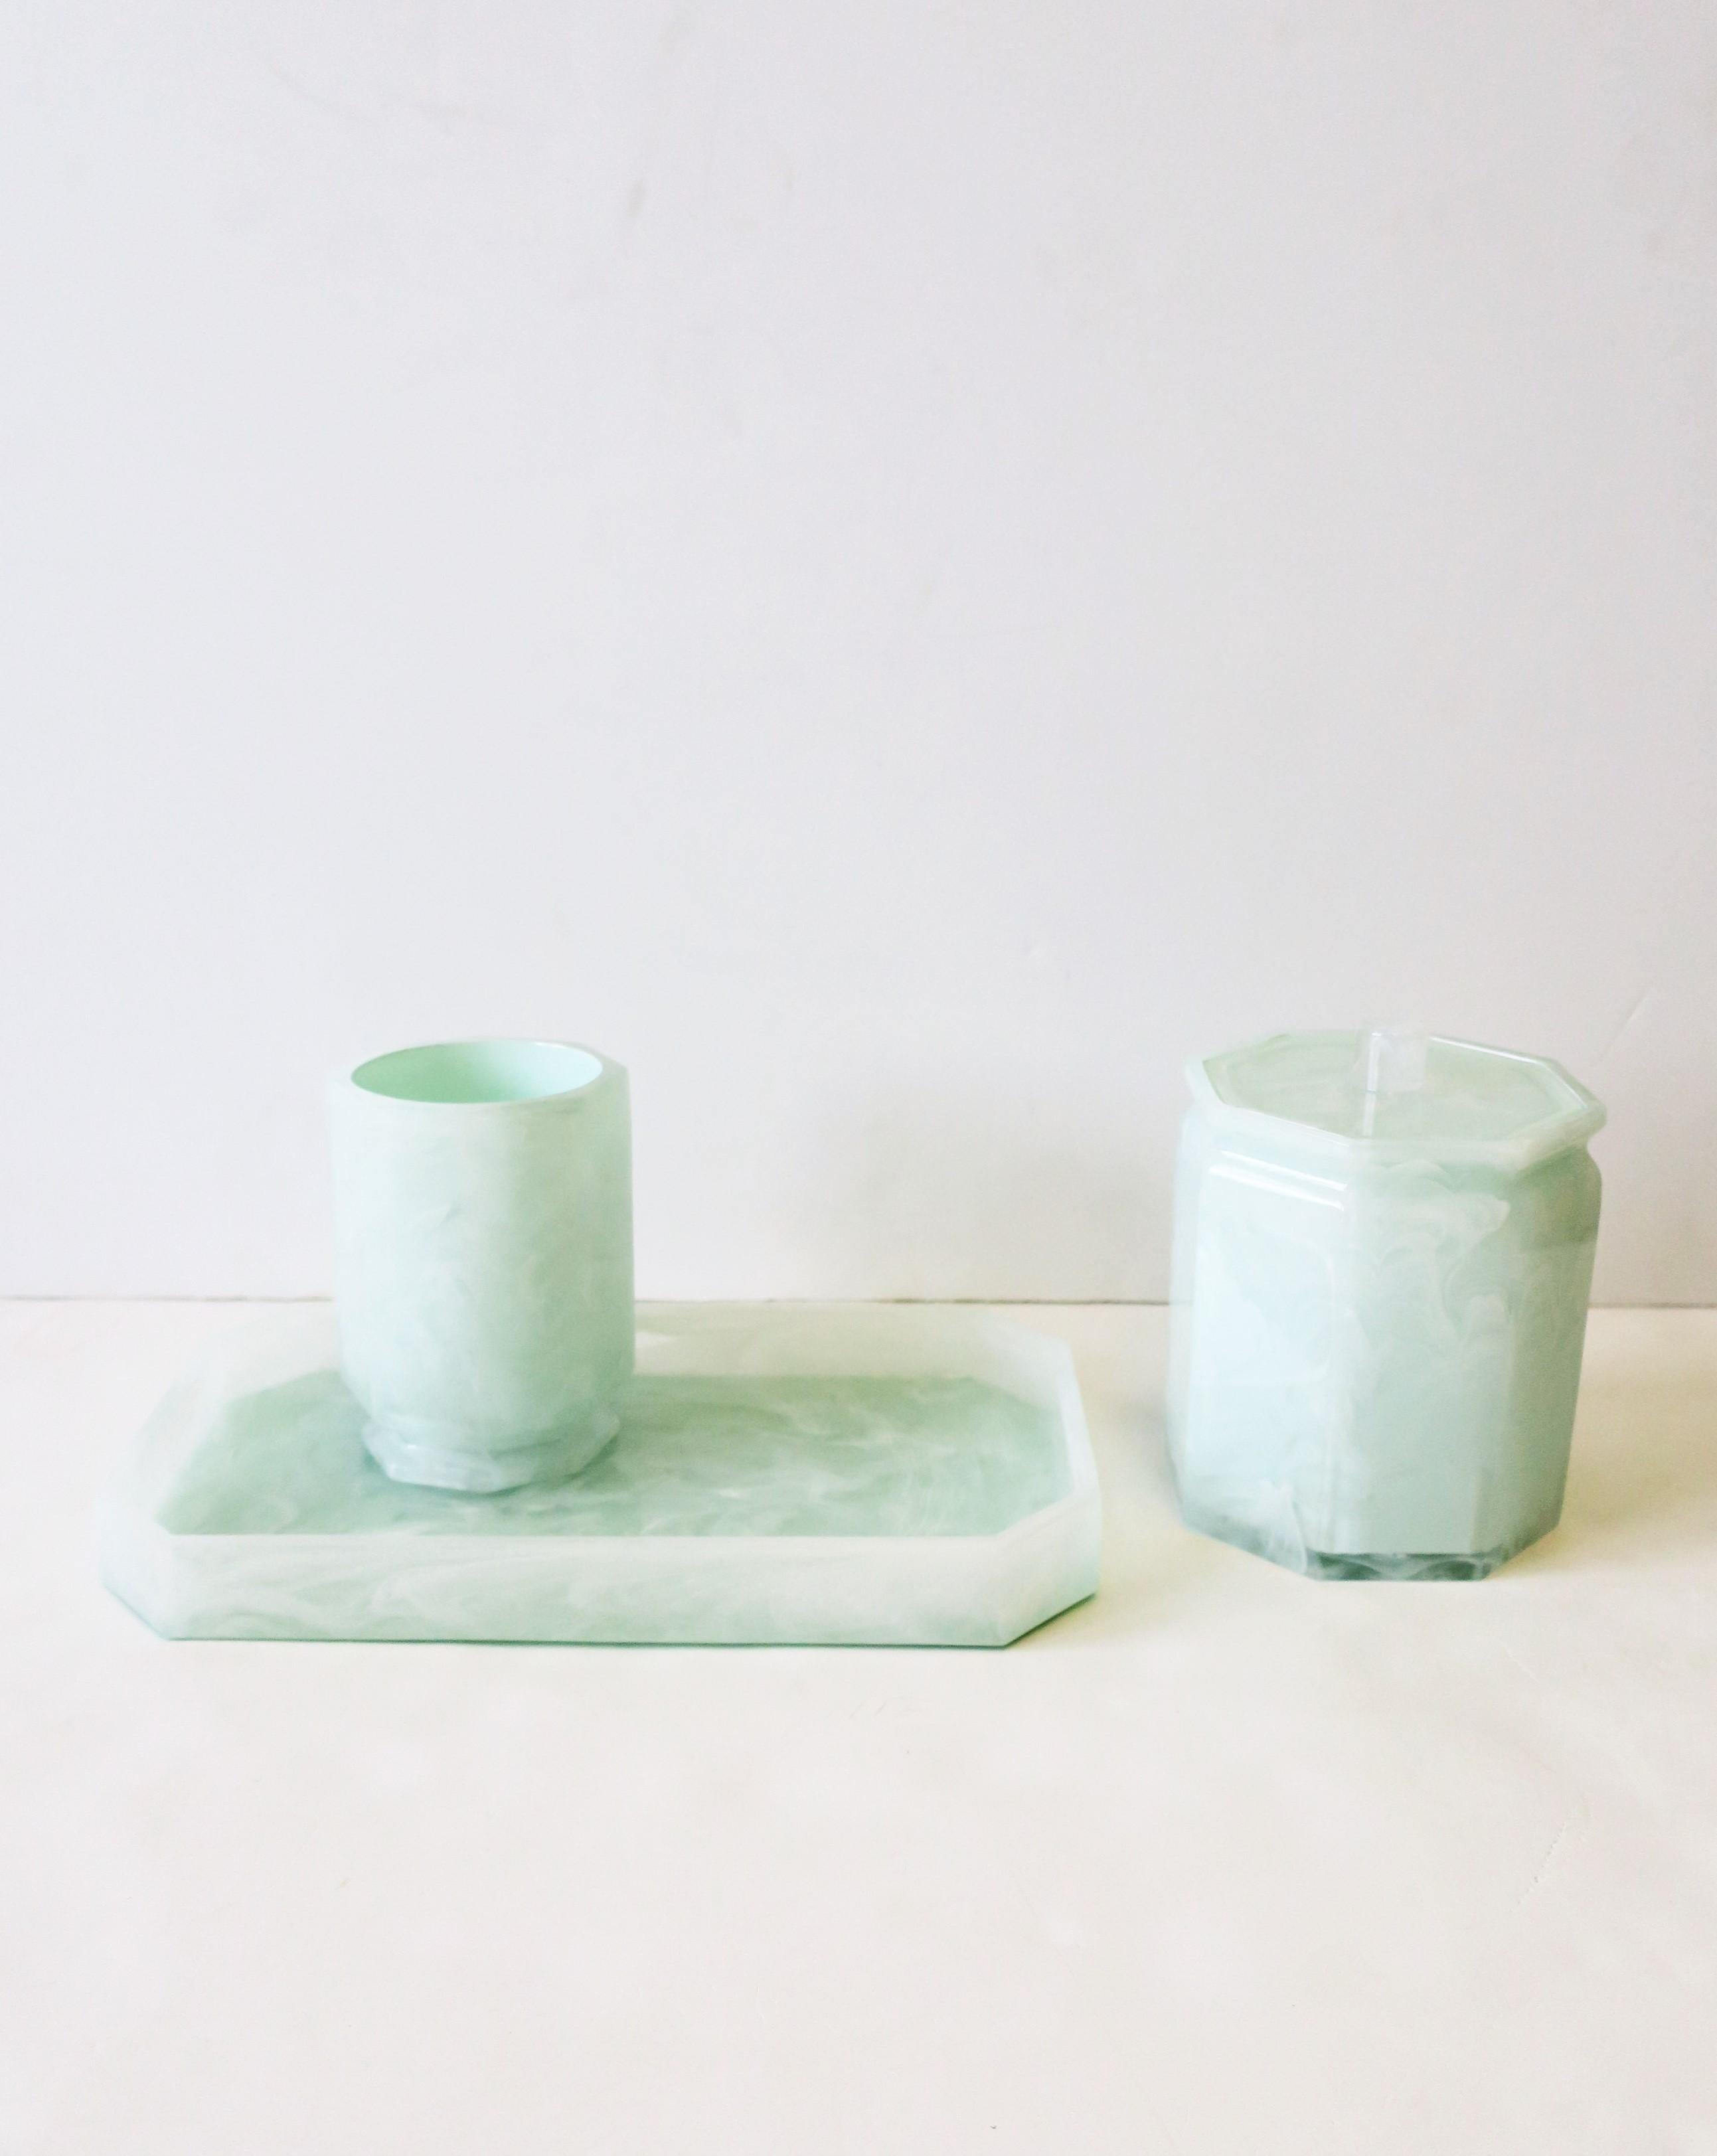 A beautiful marble style octagonal shaped acrylic bathroom vanity or desk tray set in white and light or 'mint' green. Pieces are in the style of modern. There are three (3) pieces to this set; tray, cup, and box vessel. These 3 piece are versatile;